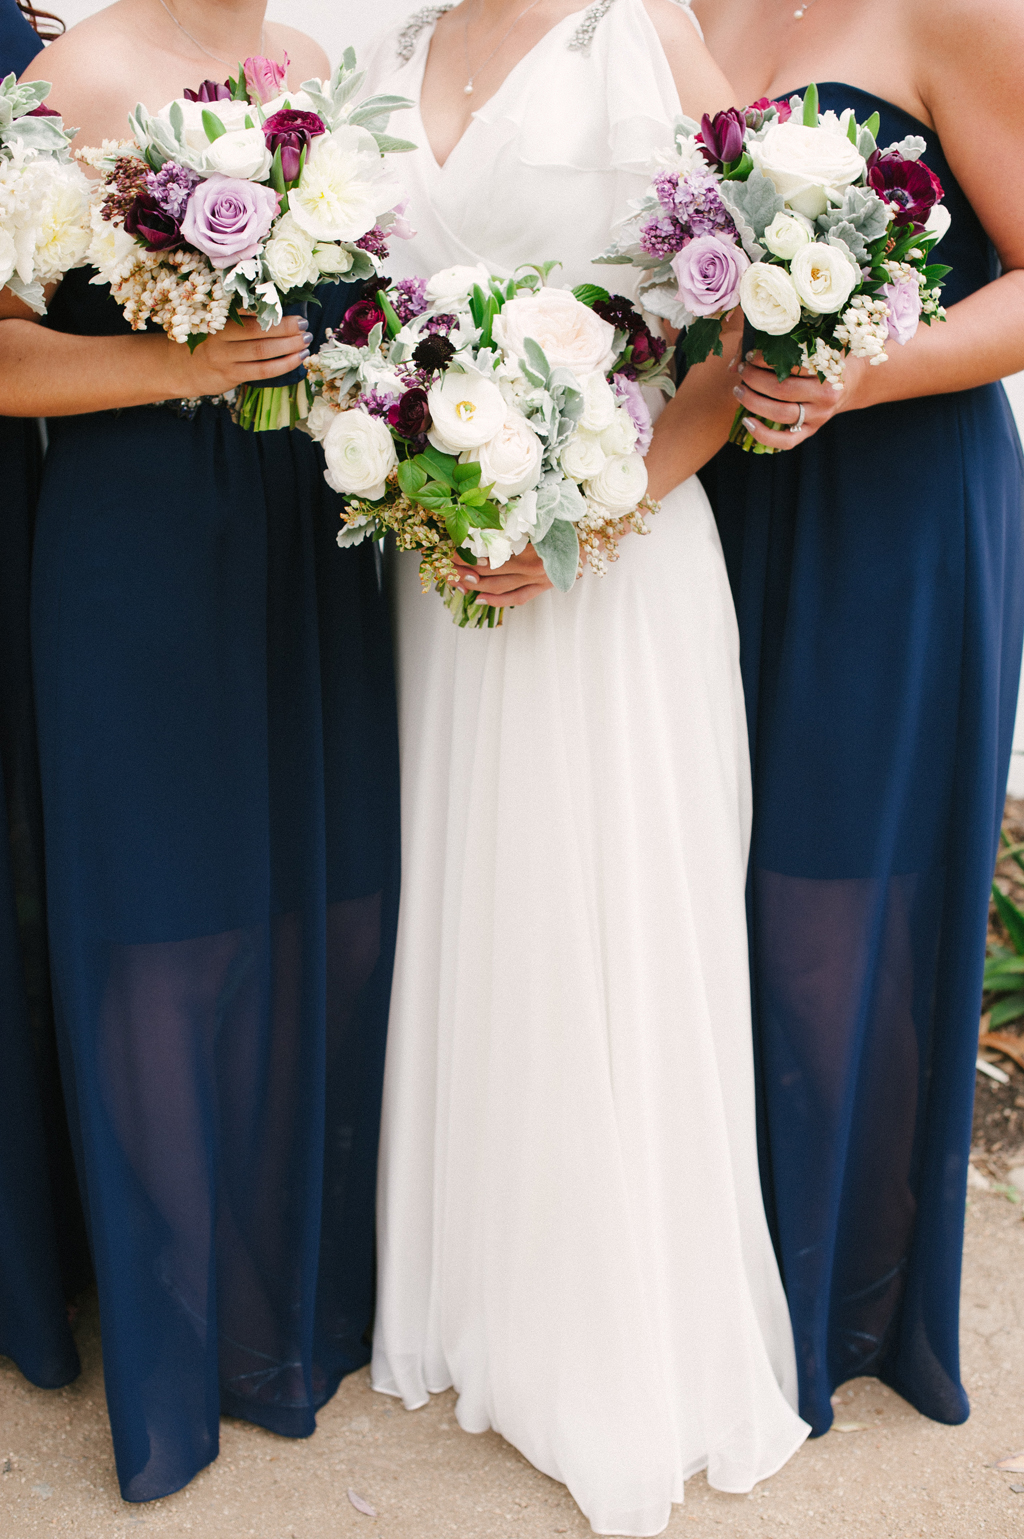 detail shot of bride and bridesmaids bouquets by art with nature and their blue dresses at a wedding in southern california